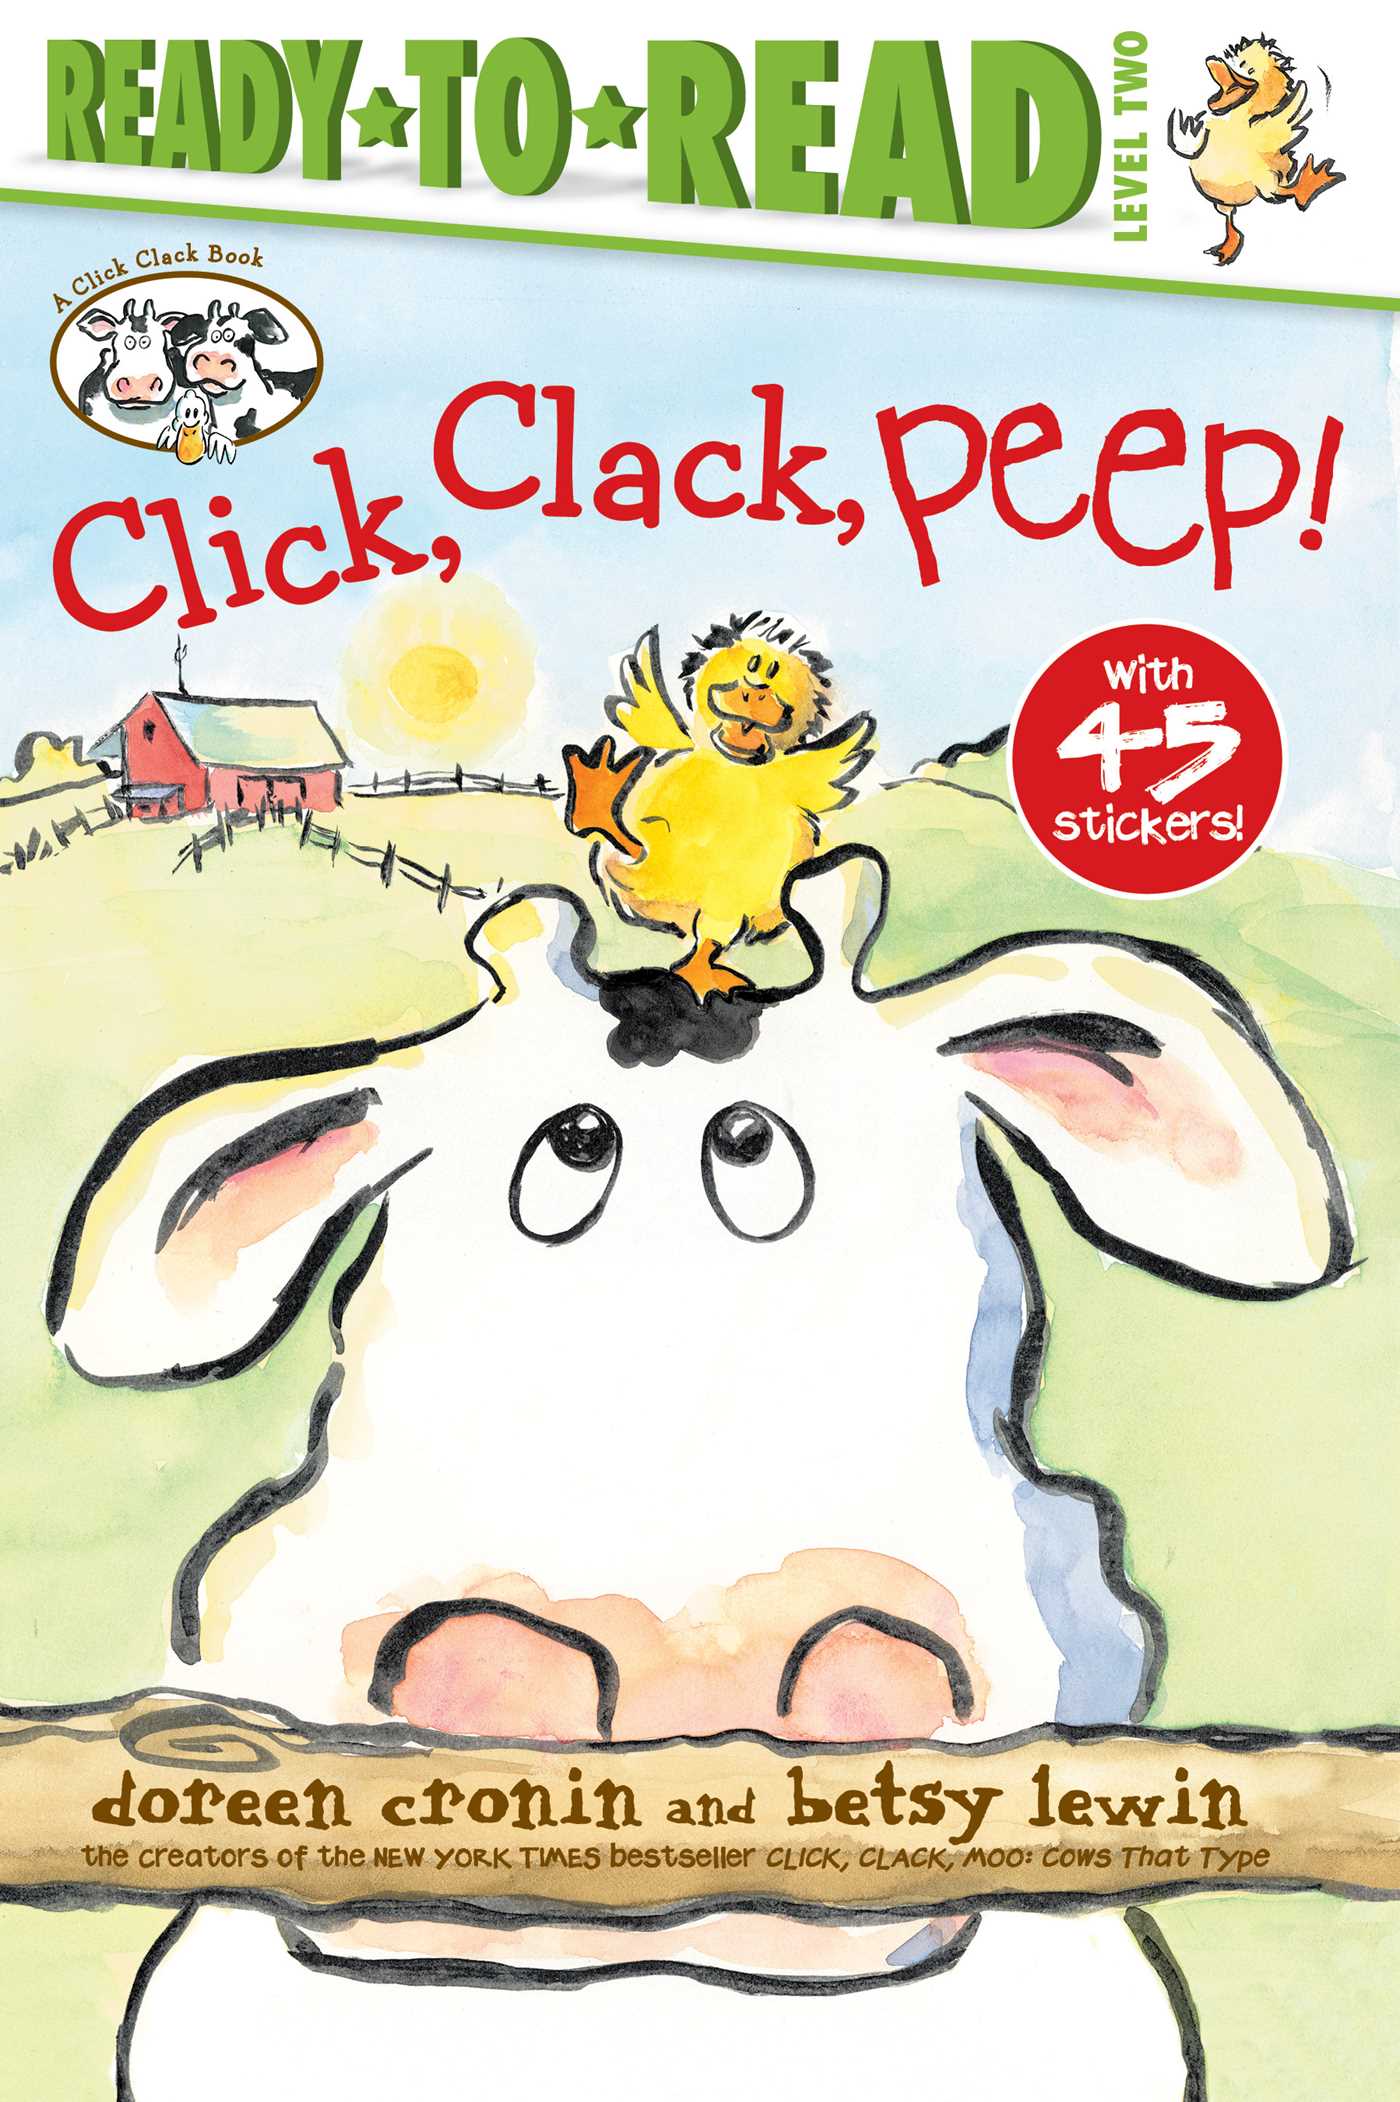 Ready-to-Read - Click, Clack, Peep! | First reader